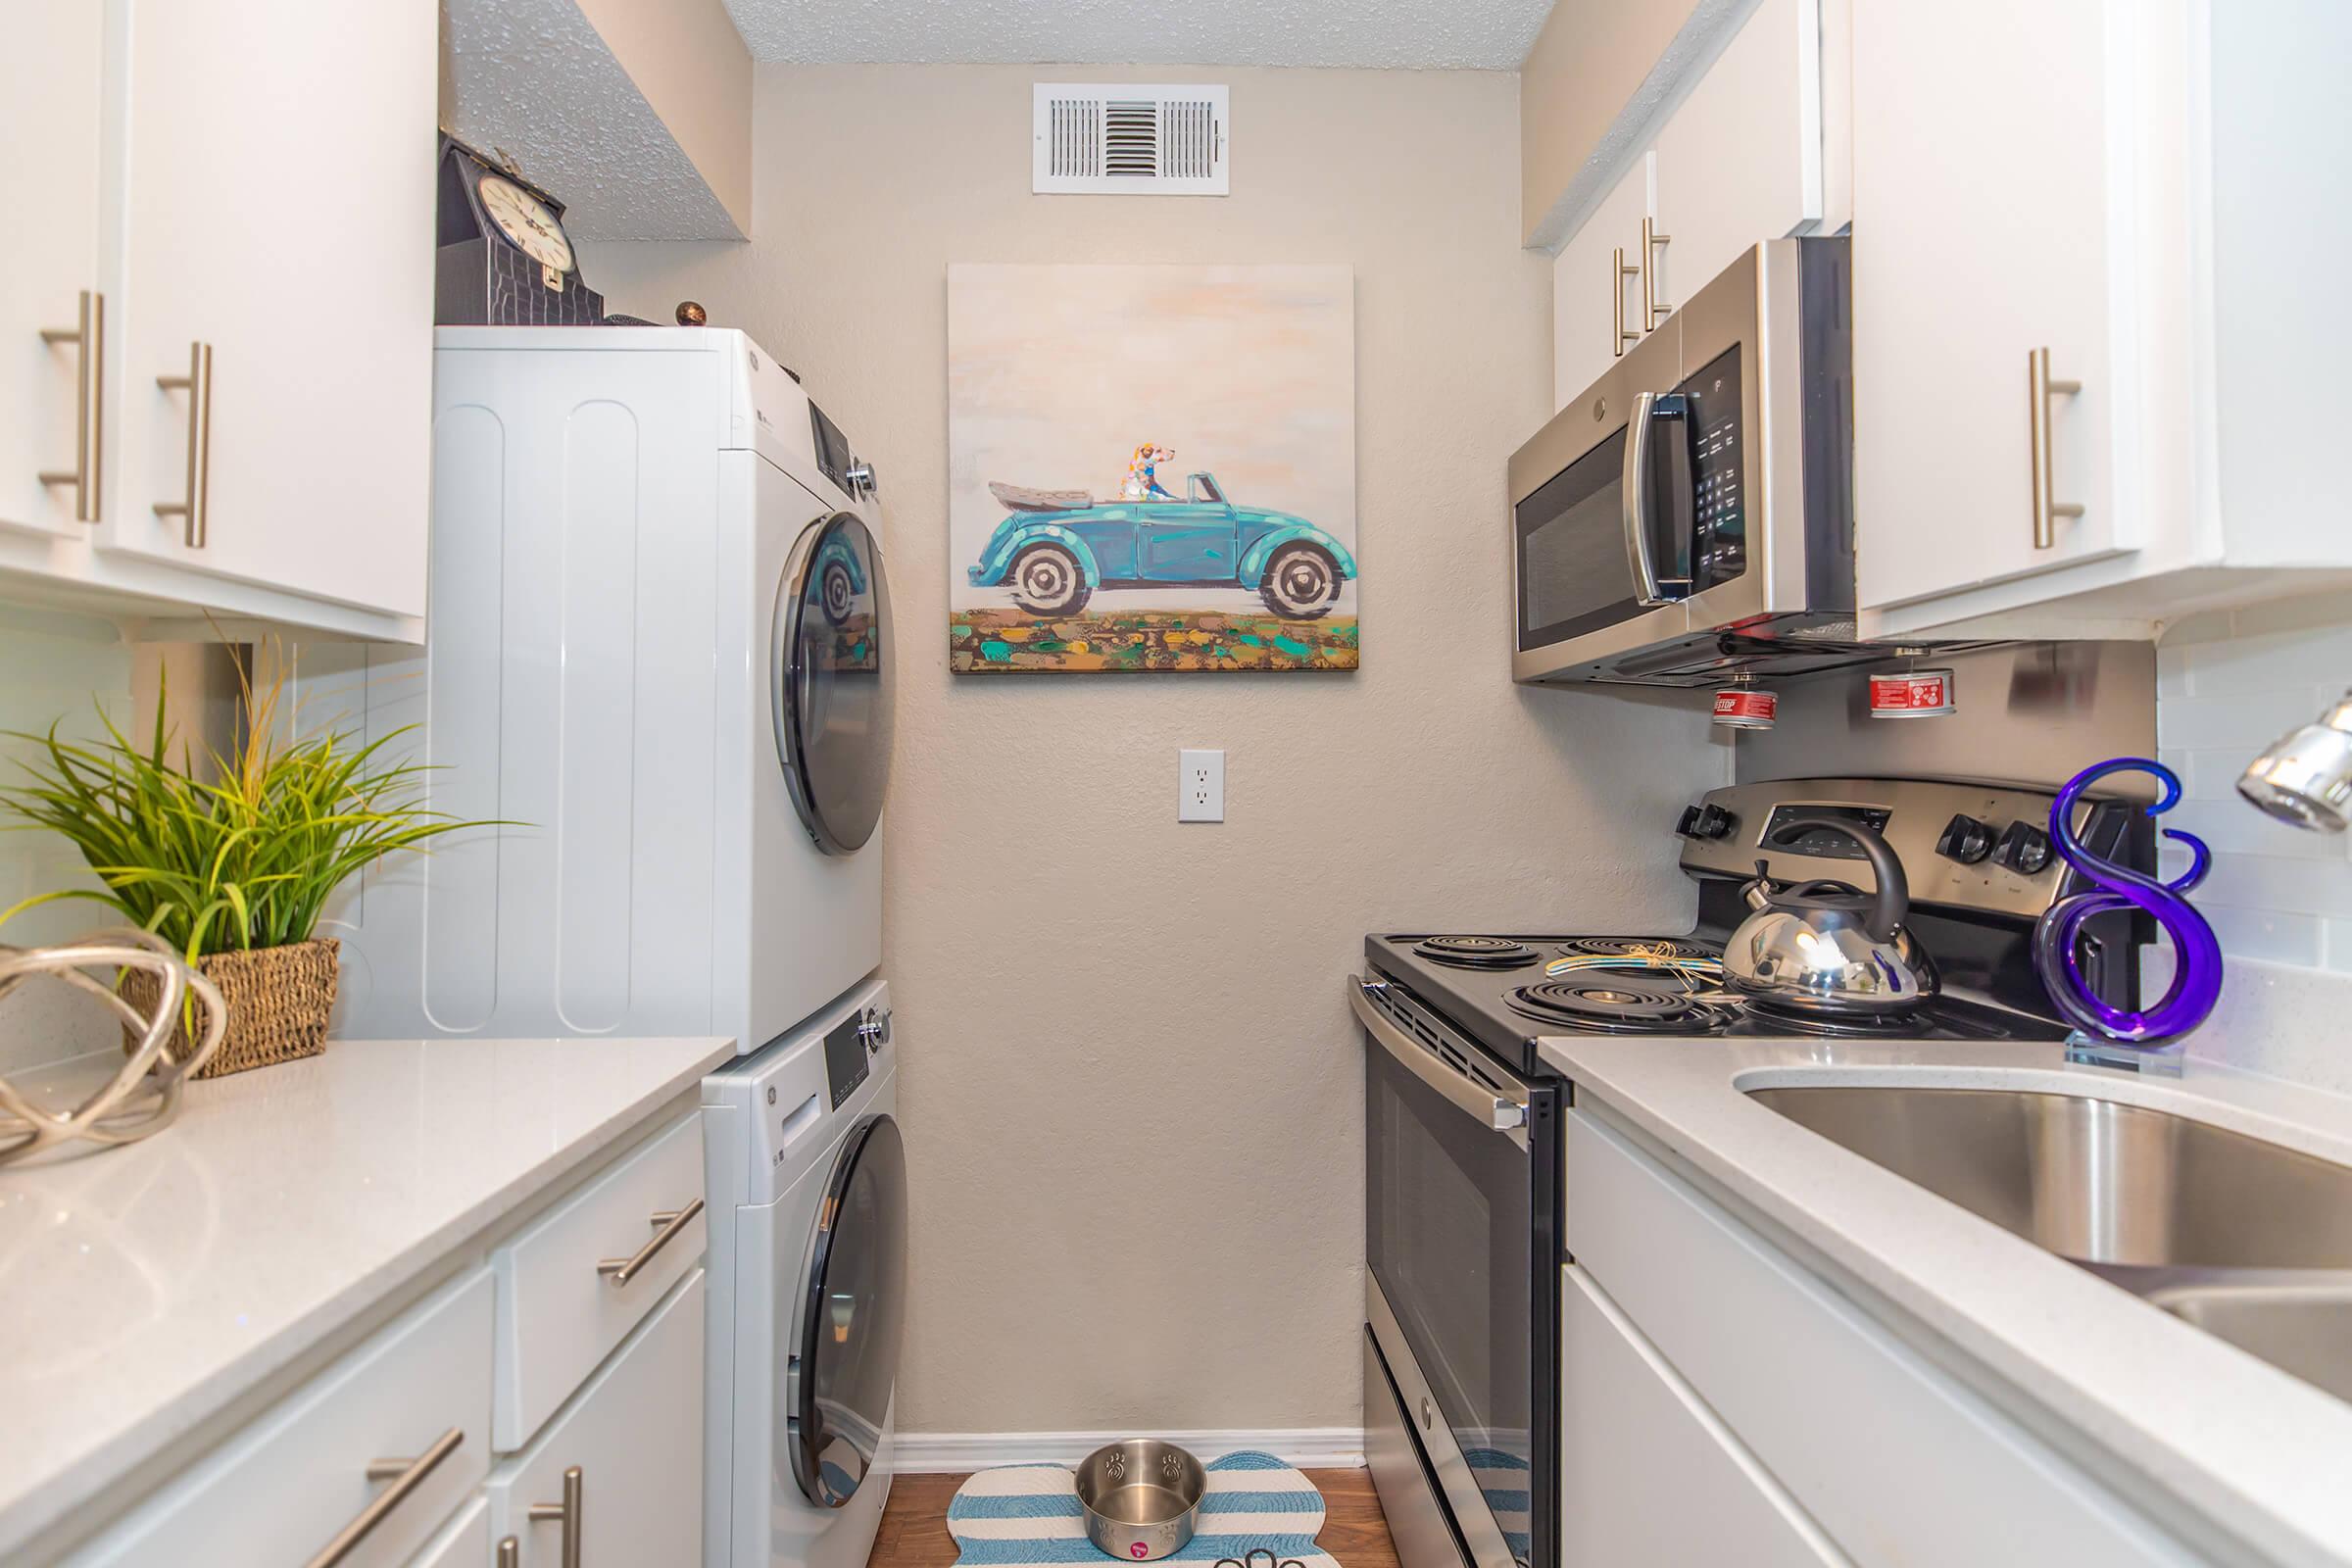 A model apartment kitchen with white cabinets and a washer and dryer at Rise Oak Creek.